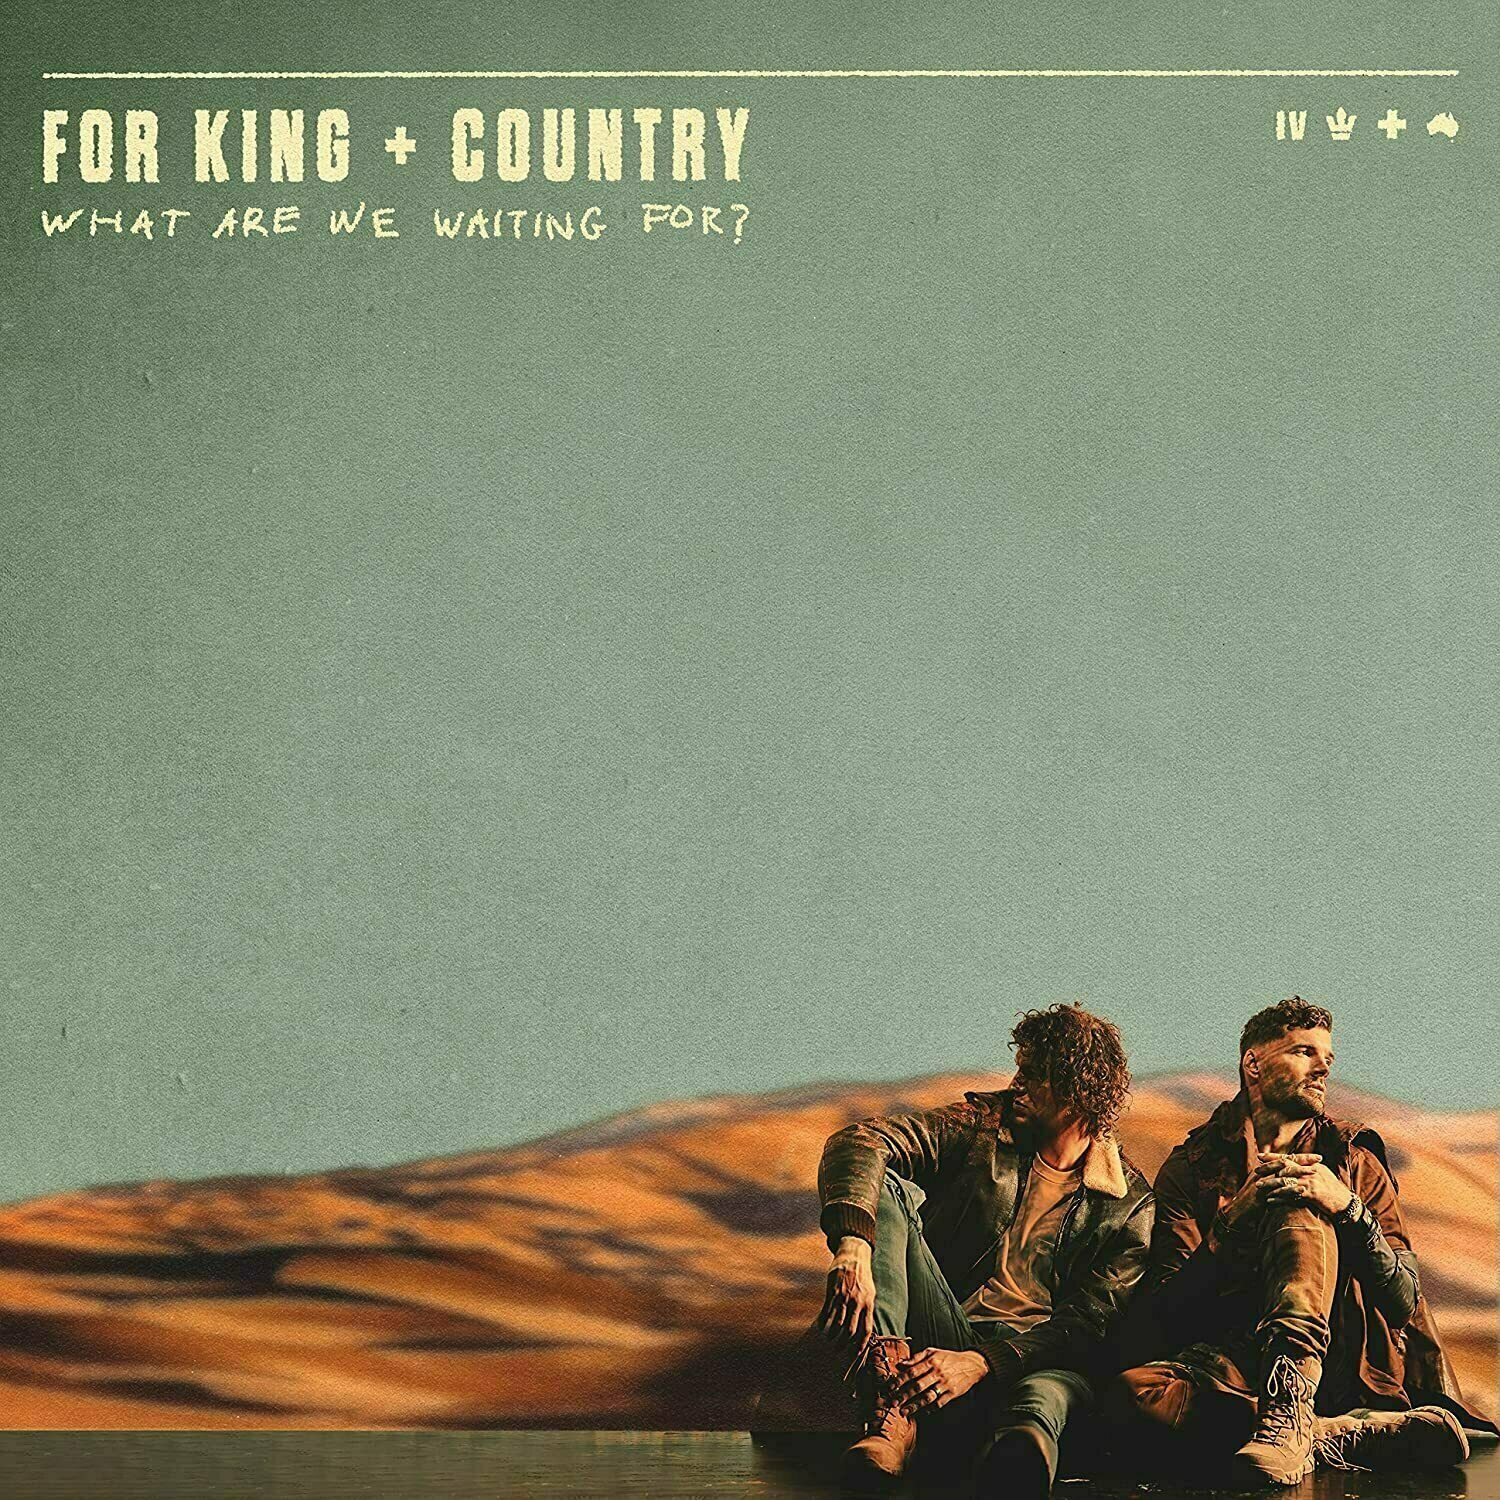 Vinylplade For King & Country - What Are We Waiting For? (2 LP)